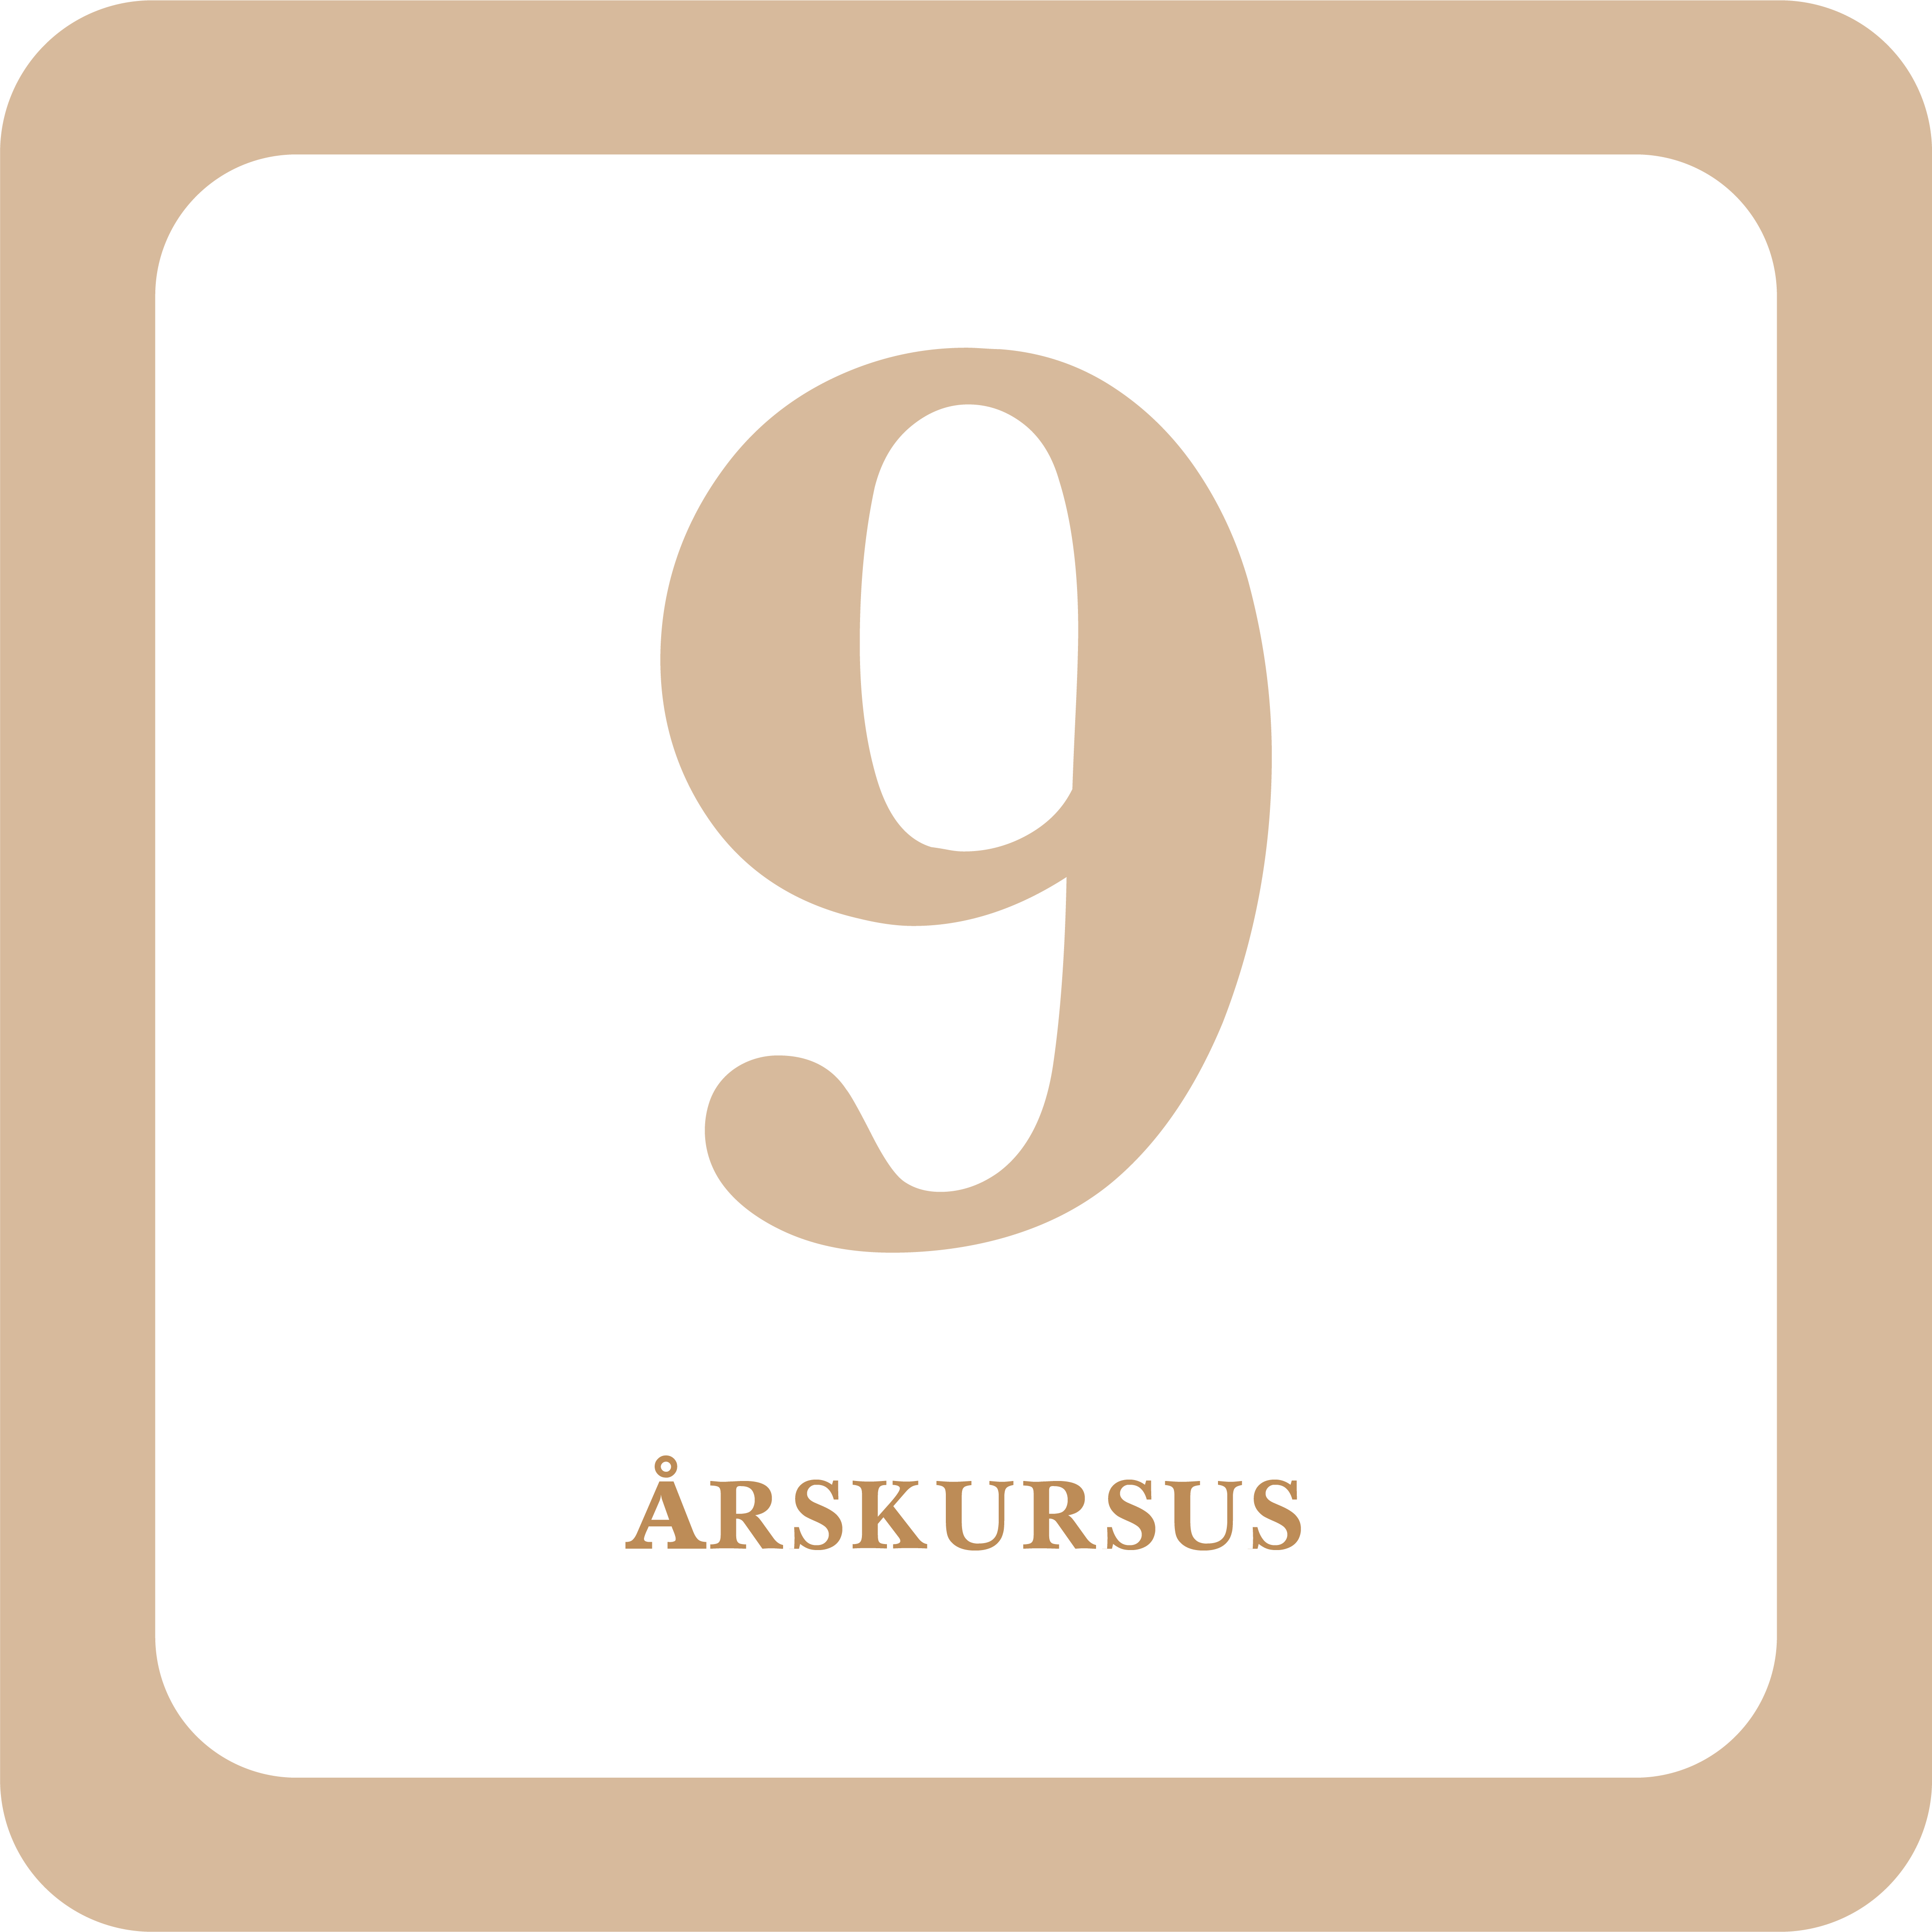 Read more about the article ARSKURSUS